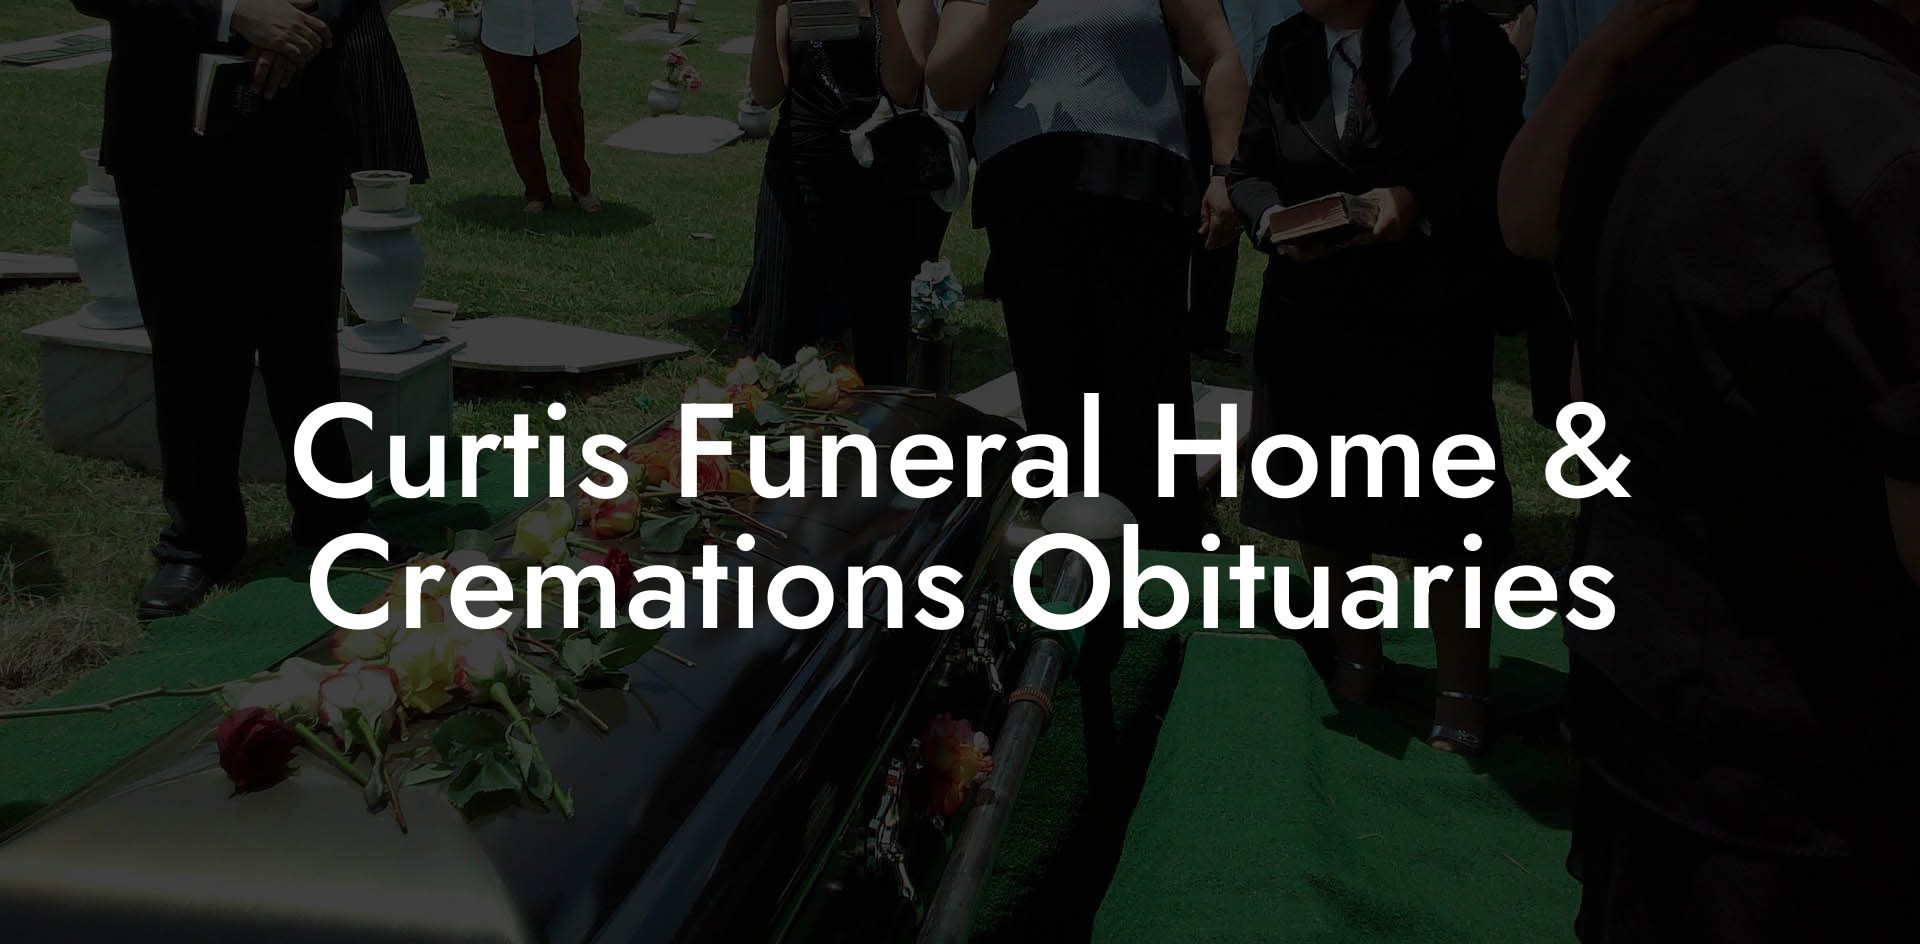 Curtis Funeral Home & Cremations Obituaries